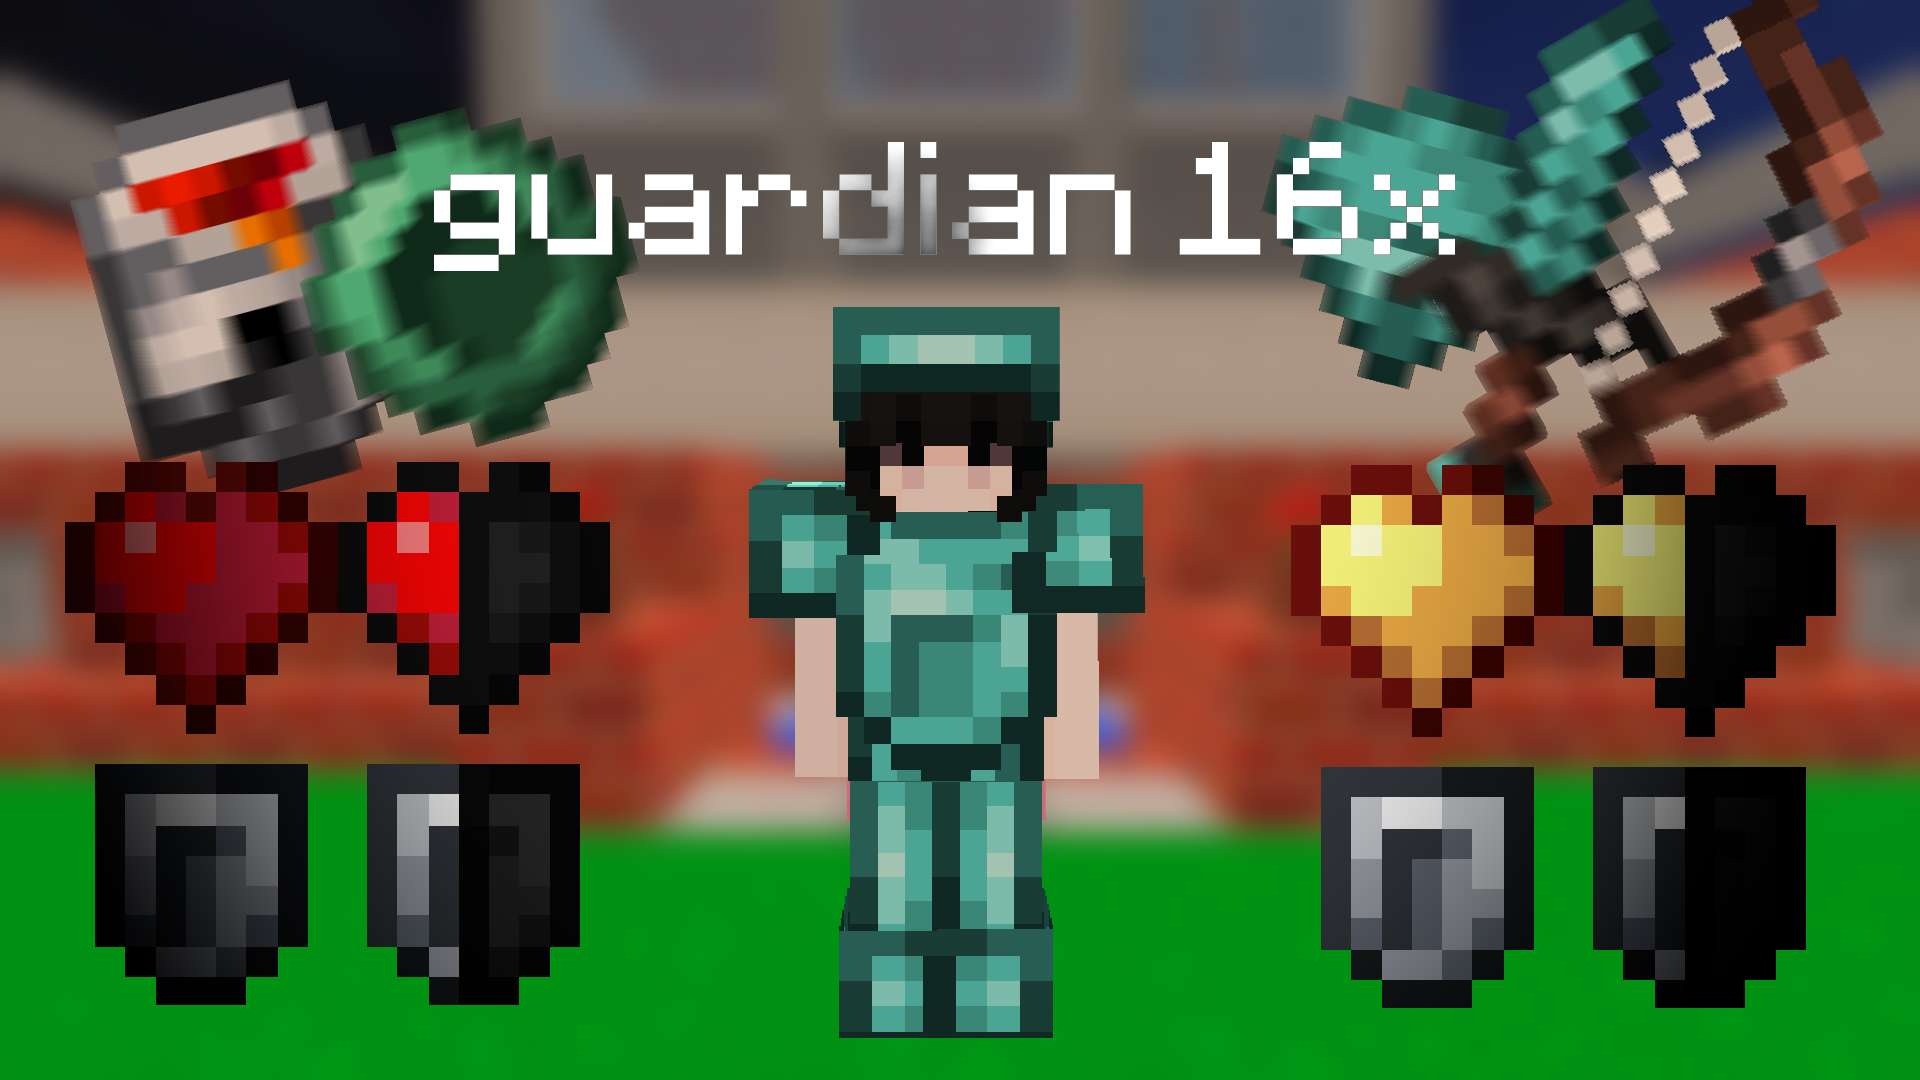 guardian 16 by itzumiFR on PvPRP